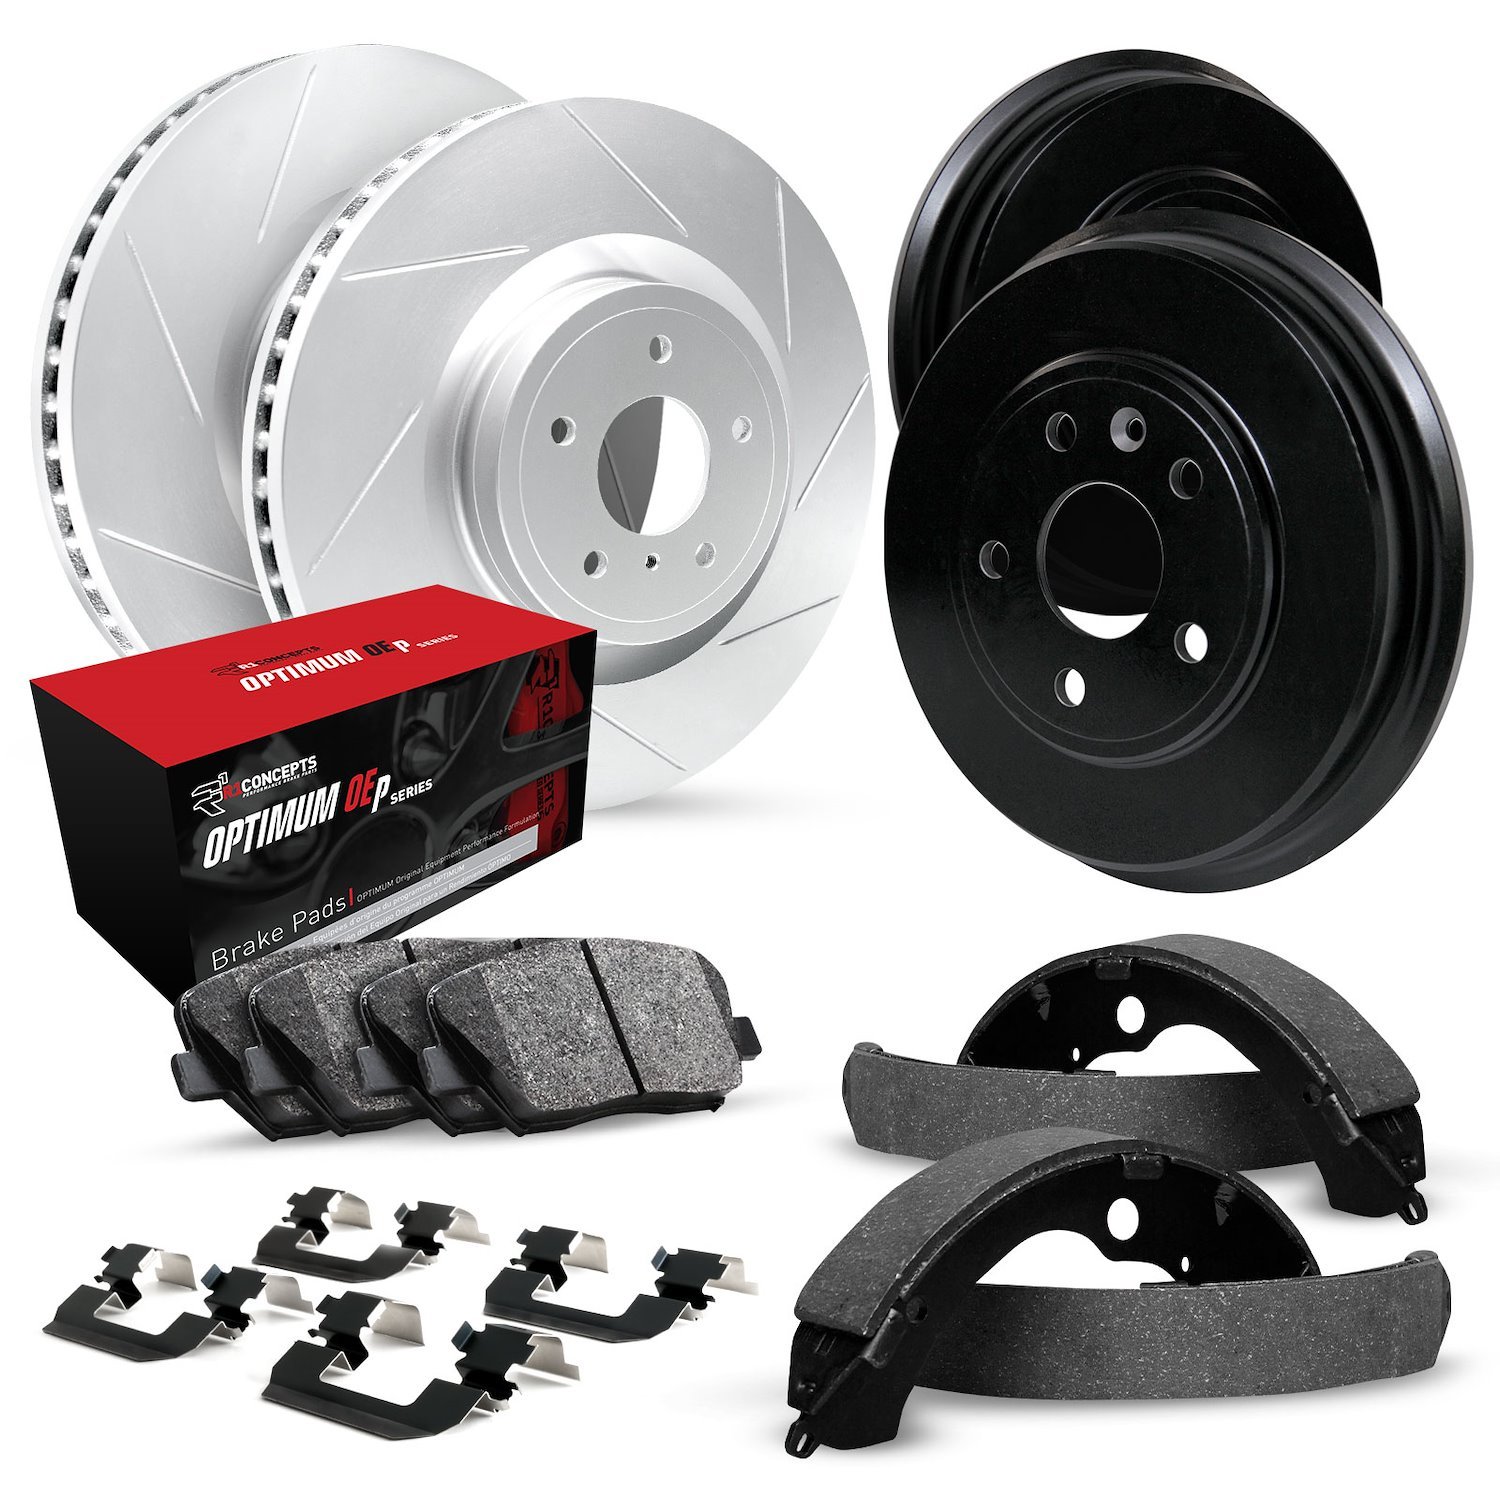 GEO-Carbon Slotted Brake Rotor & Drum Set w/Optimum OE Pads, Shoes, & Hardware, 1997-2005 GM, Position: Front & Rear